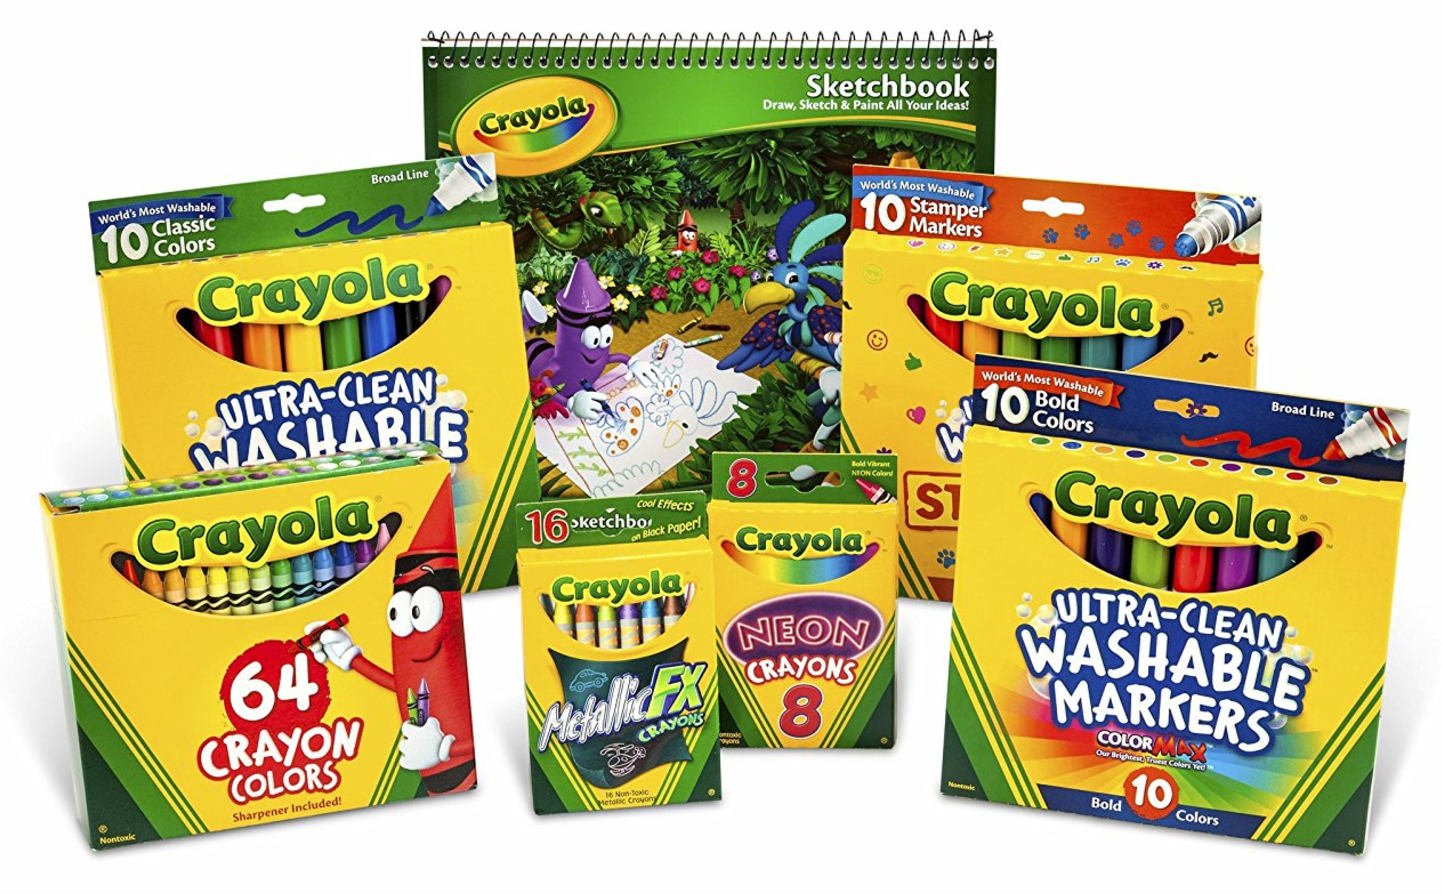 Crayola Crayon And Crayola Ultraclean Washable Marker Kit -- $12.38 (reg. $25.49), BEST Price!